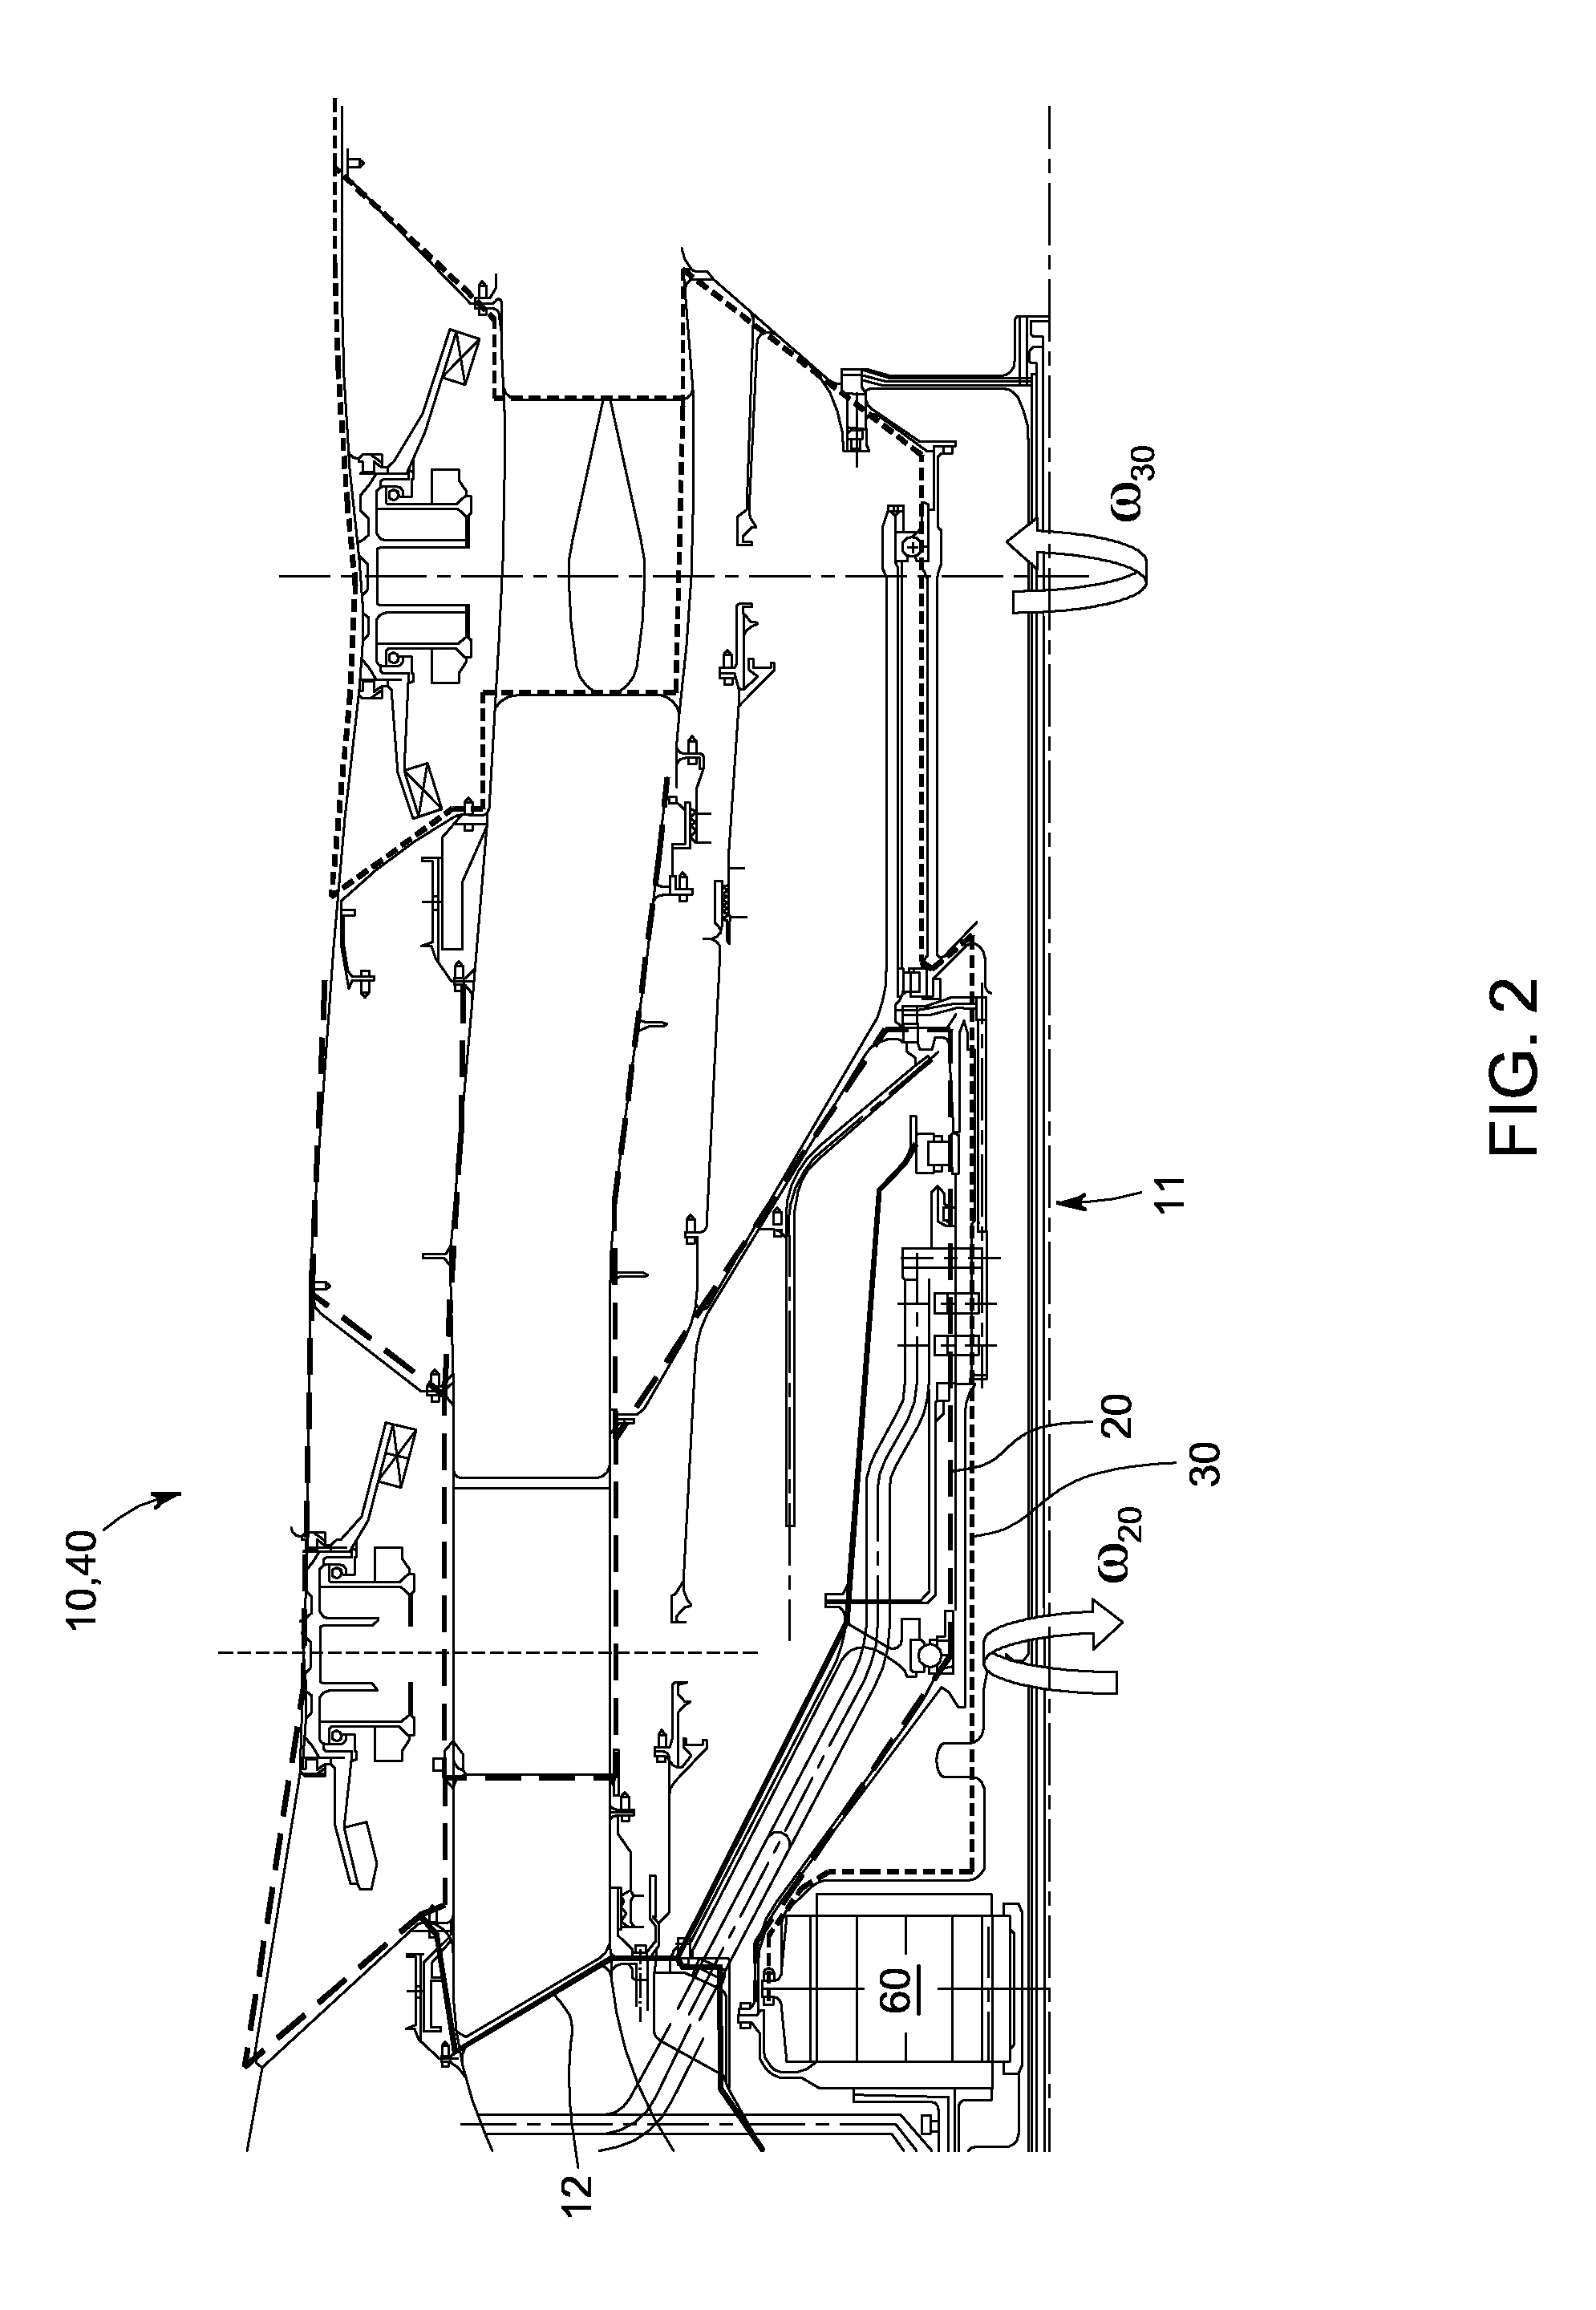 Pitch control of contra-rotating airfoil blades